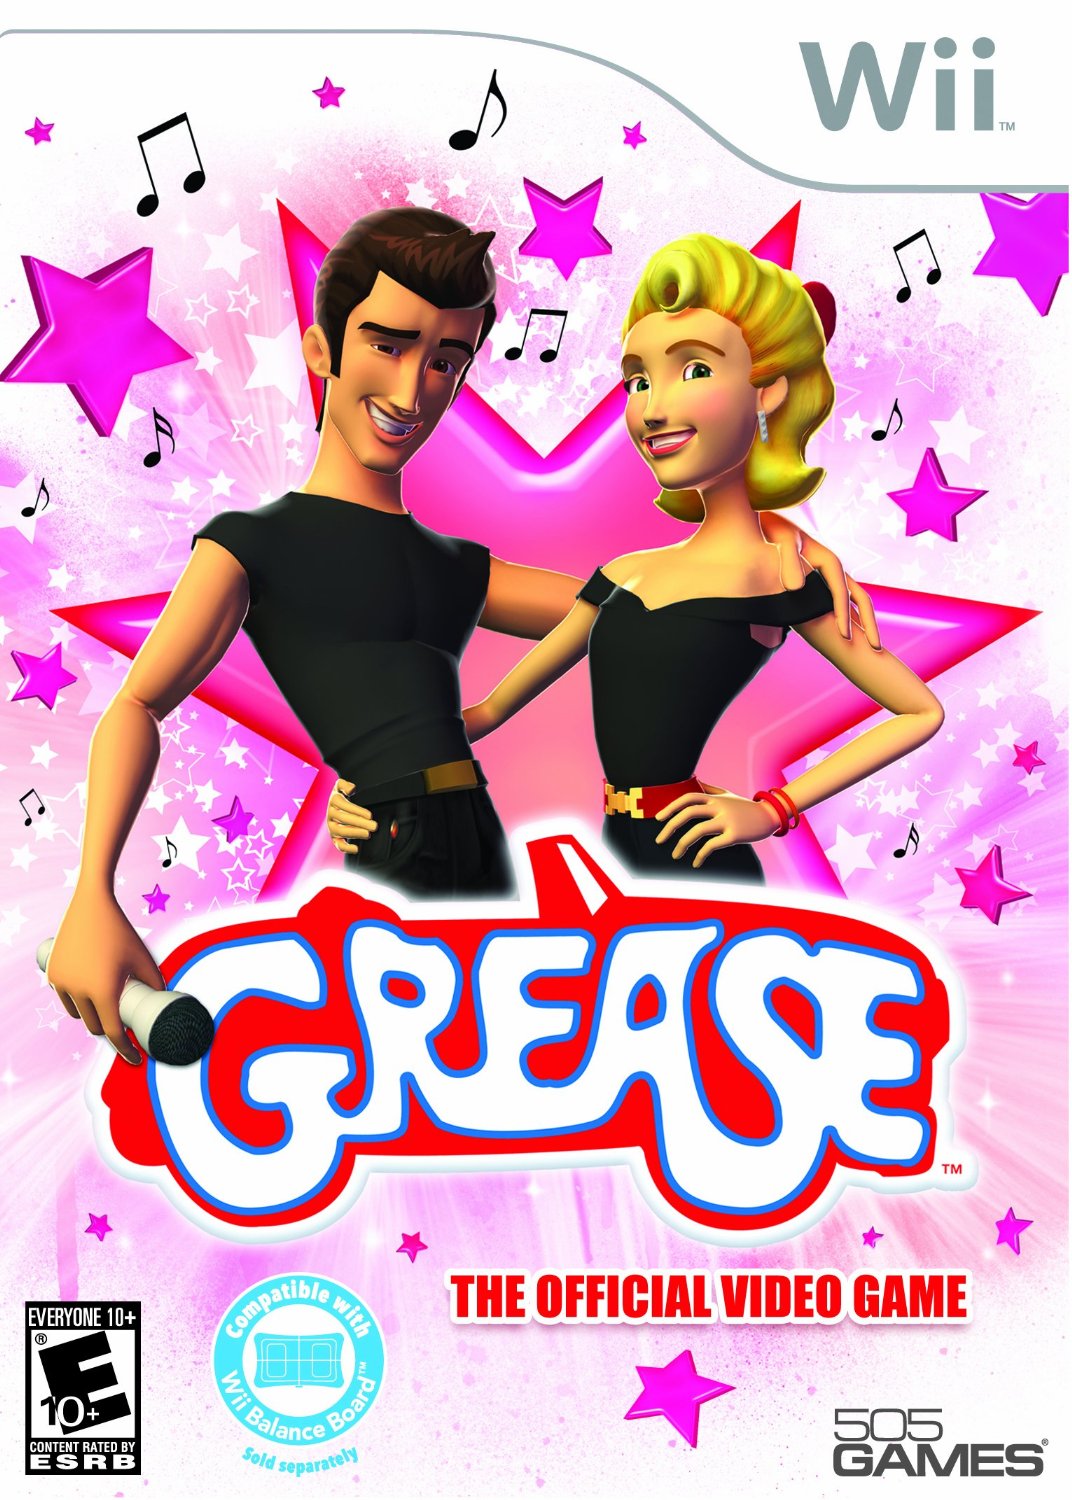 Grease (Wii), Zoë Mode